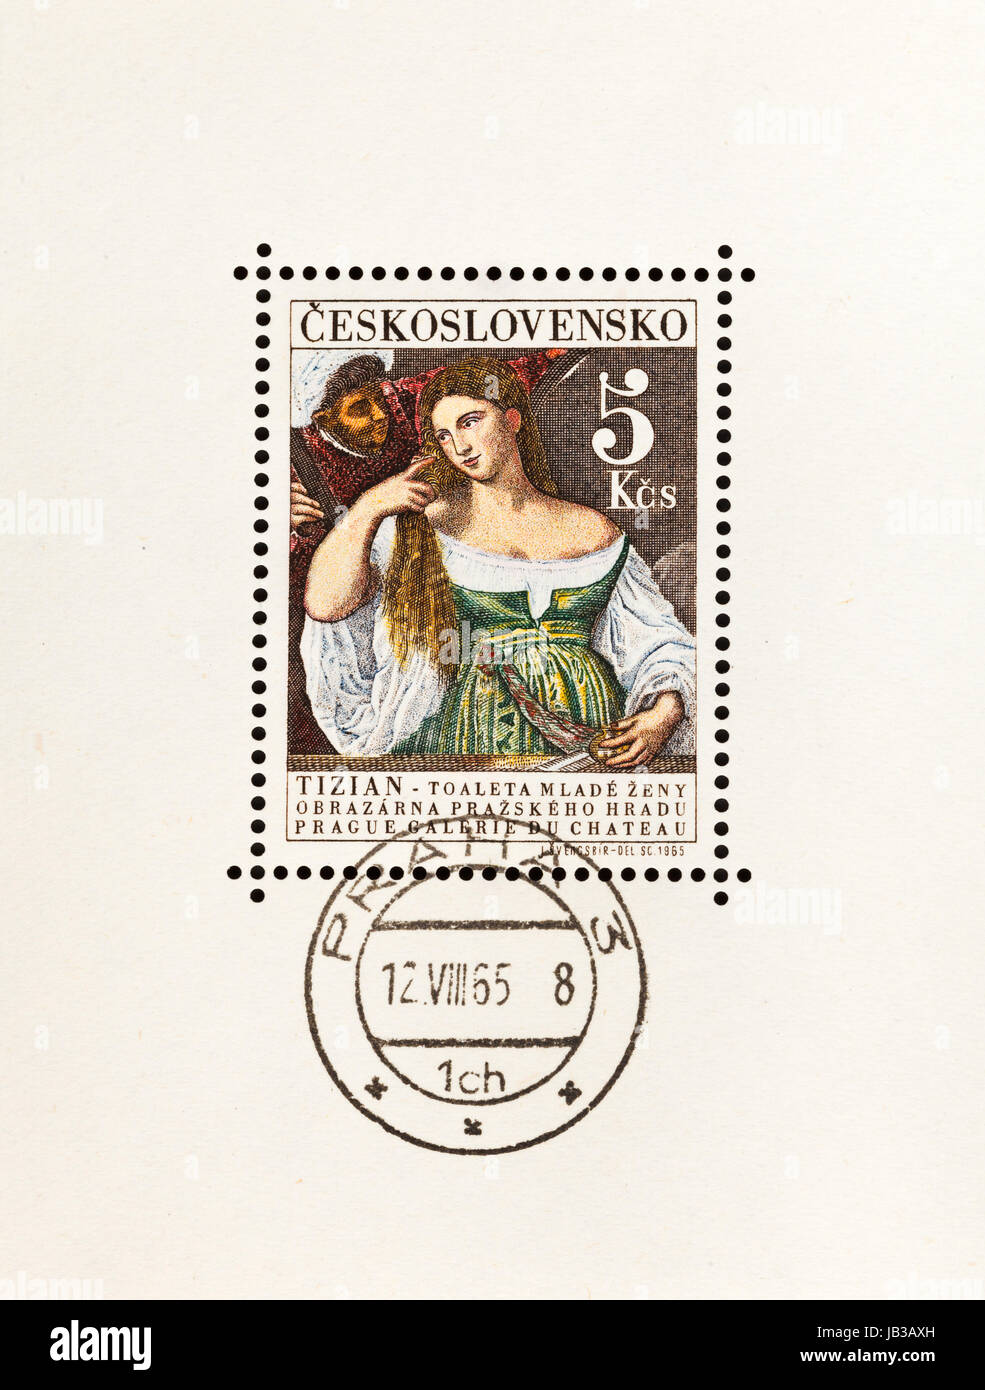 CZECHOSLOVAKIA - CIRCA 1965: A postage stamp printed in the Czechoslovakia shows Tiziano Vecellio (Titian) painting Portrait of young Woman at her Toilet from Prague Castle Picture Gallery, circa 1965 Stock Photo